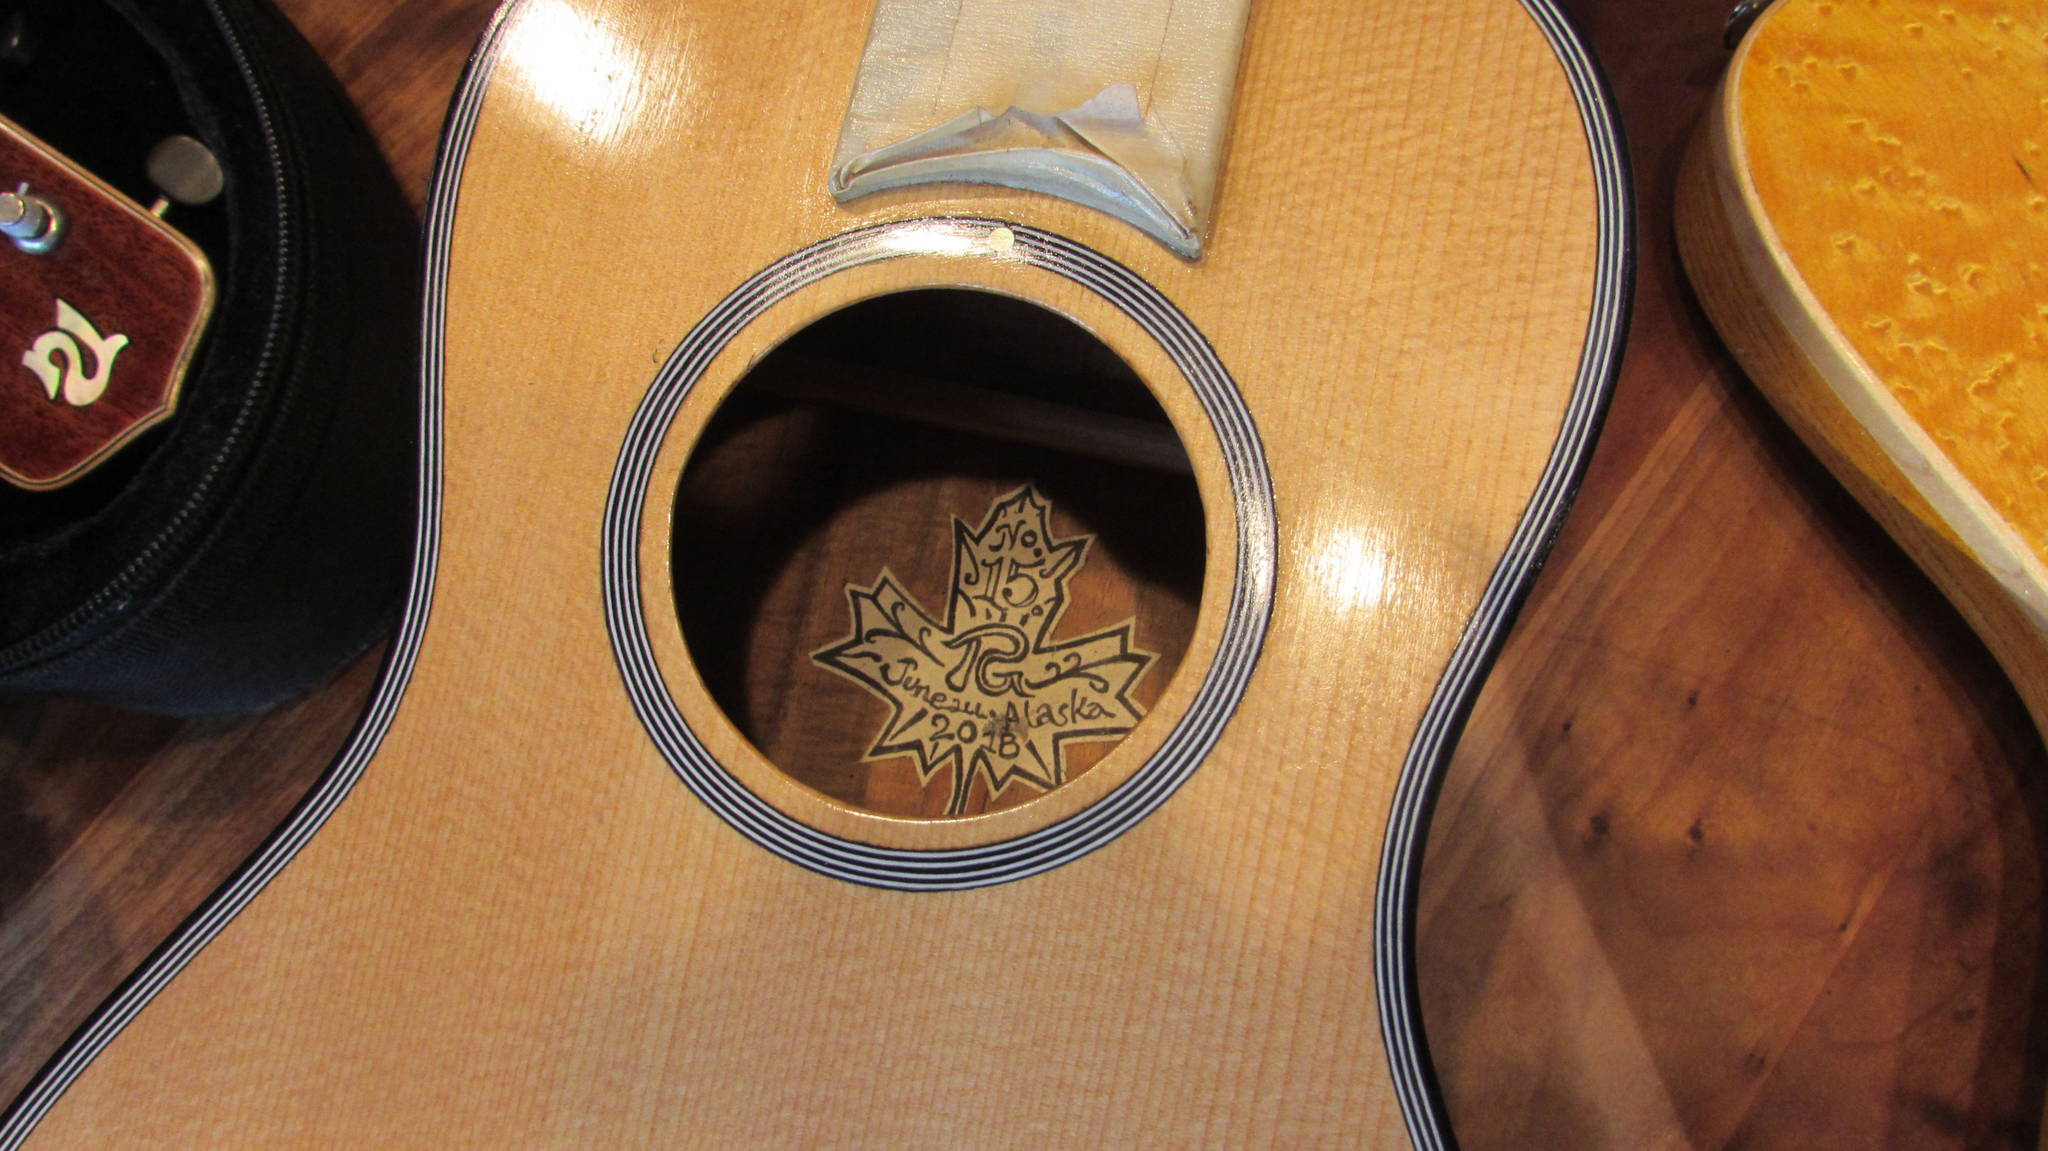 Paul Gardinier includes a hand drawn label on most of the instruments he makes. He said when you invest 40-60 hours into making a guitar or ukulele, spending another hour on a label seems insignificant. (Ben Hohenstatt | Capital City Weekly)